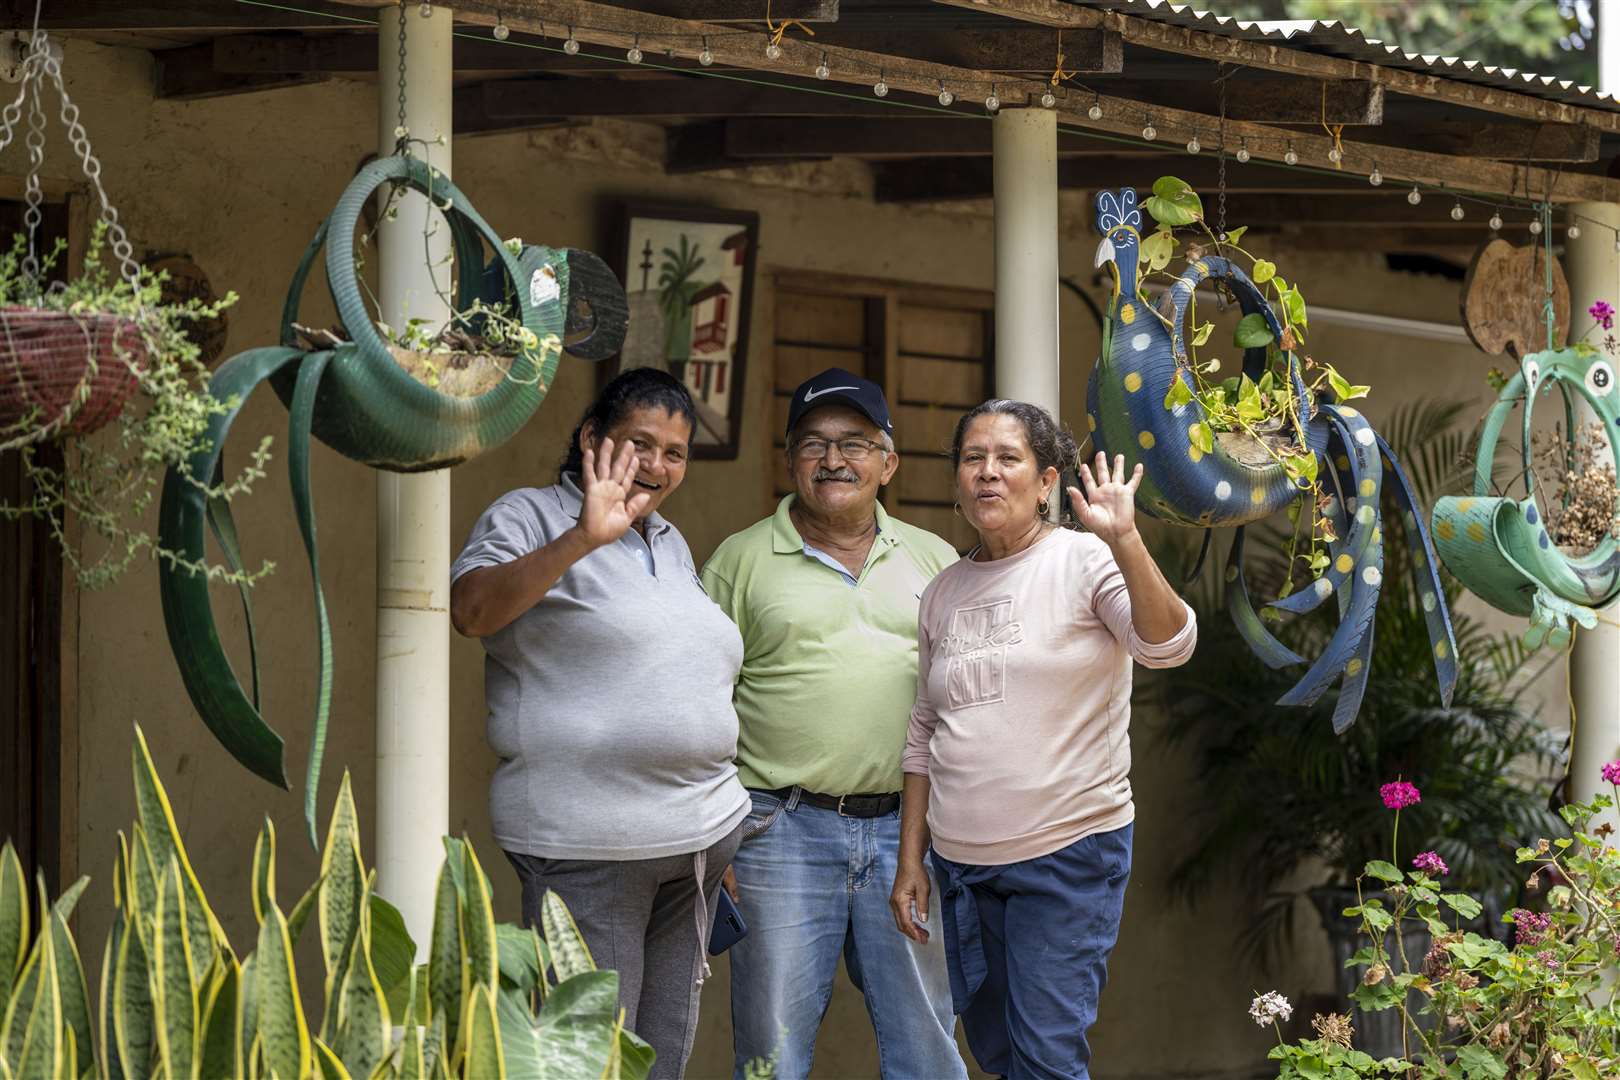 Jaime Garcia Florez with his wife Marlena Lopez (right) and another family member outside their home in the Siberia township (Chris Terry/Fairtrade/PA)